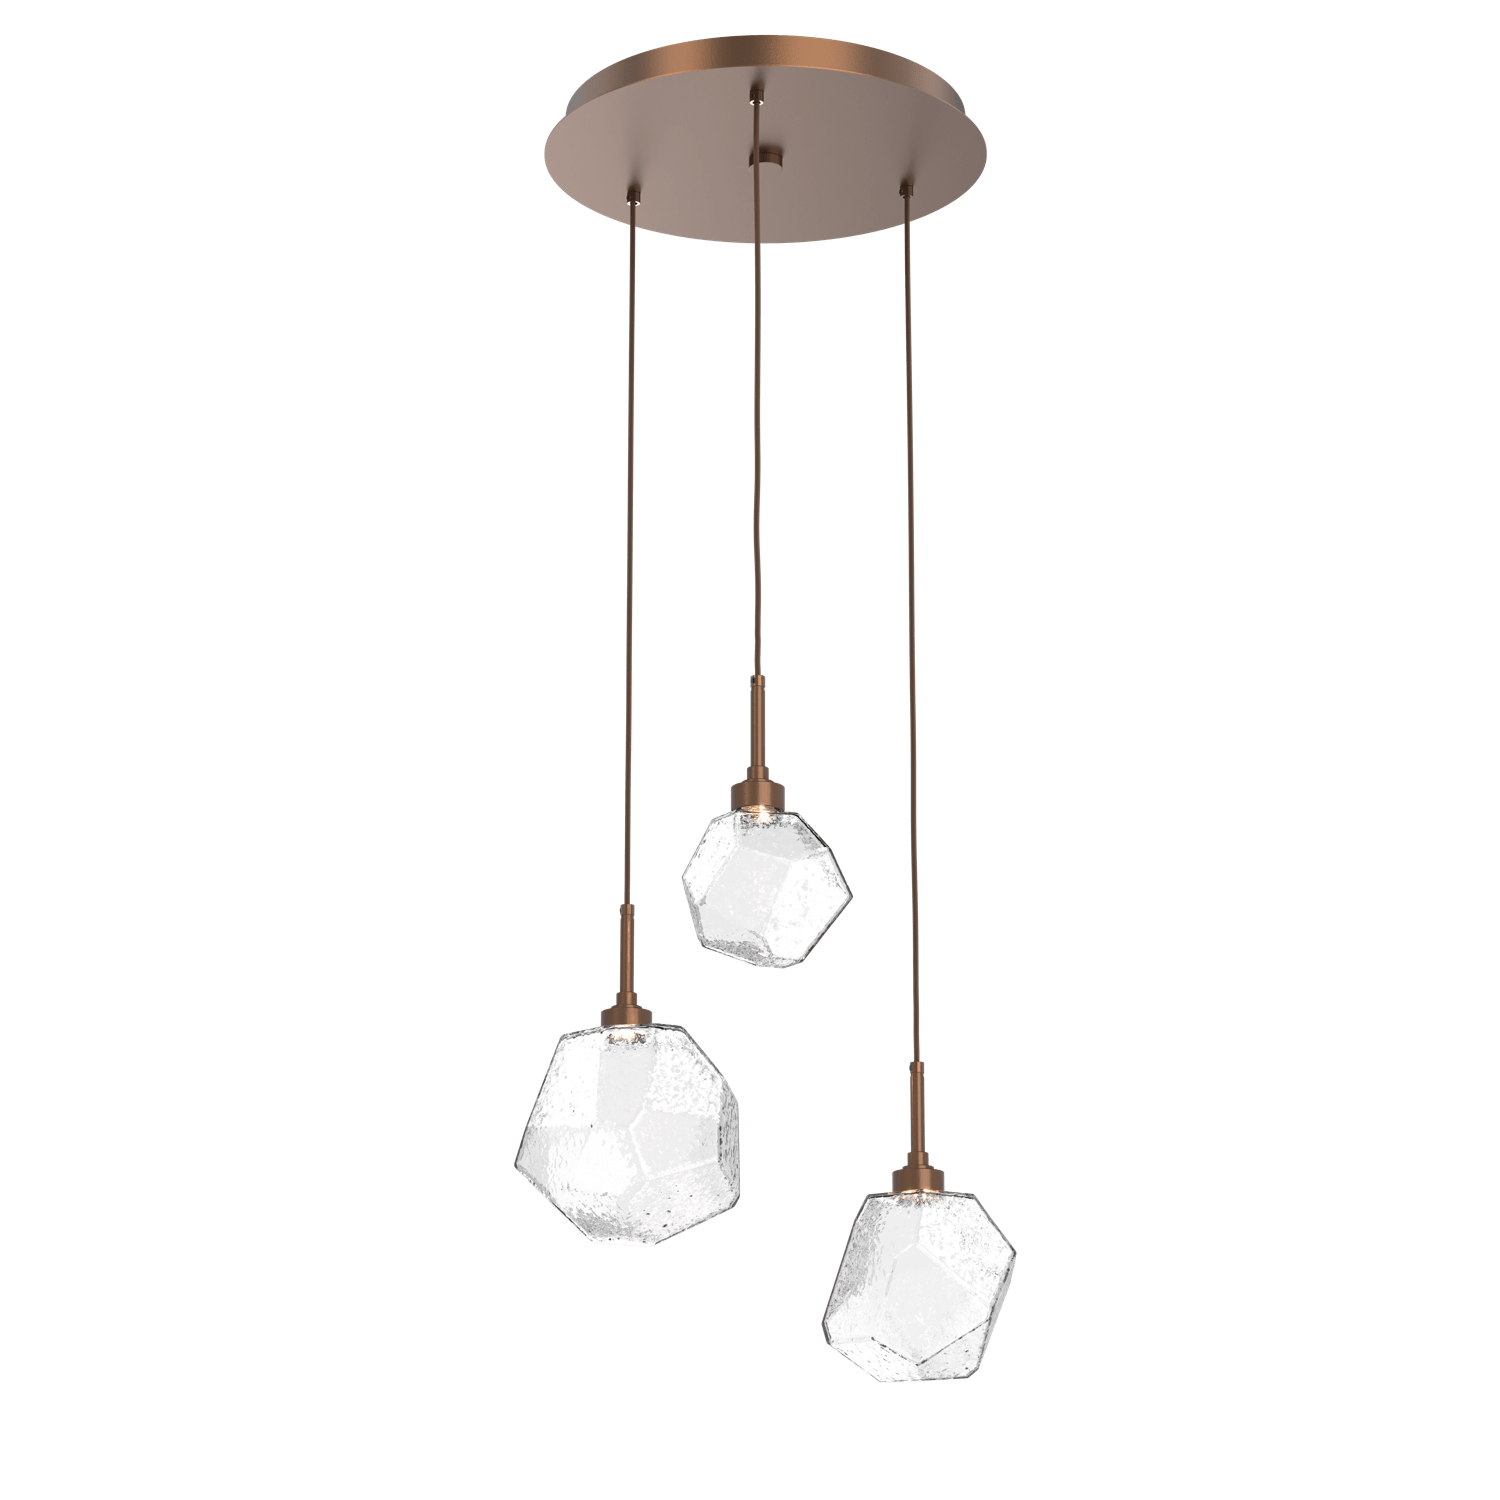 CHB0039-03-BB-C-Hammerton-Studio-Gem-3-light-round-pendant-chandelier-with-burnished-bronze-finish-and-clear-blown-glass-shades-and-LED-lamping